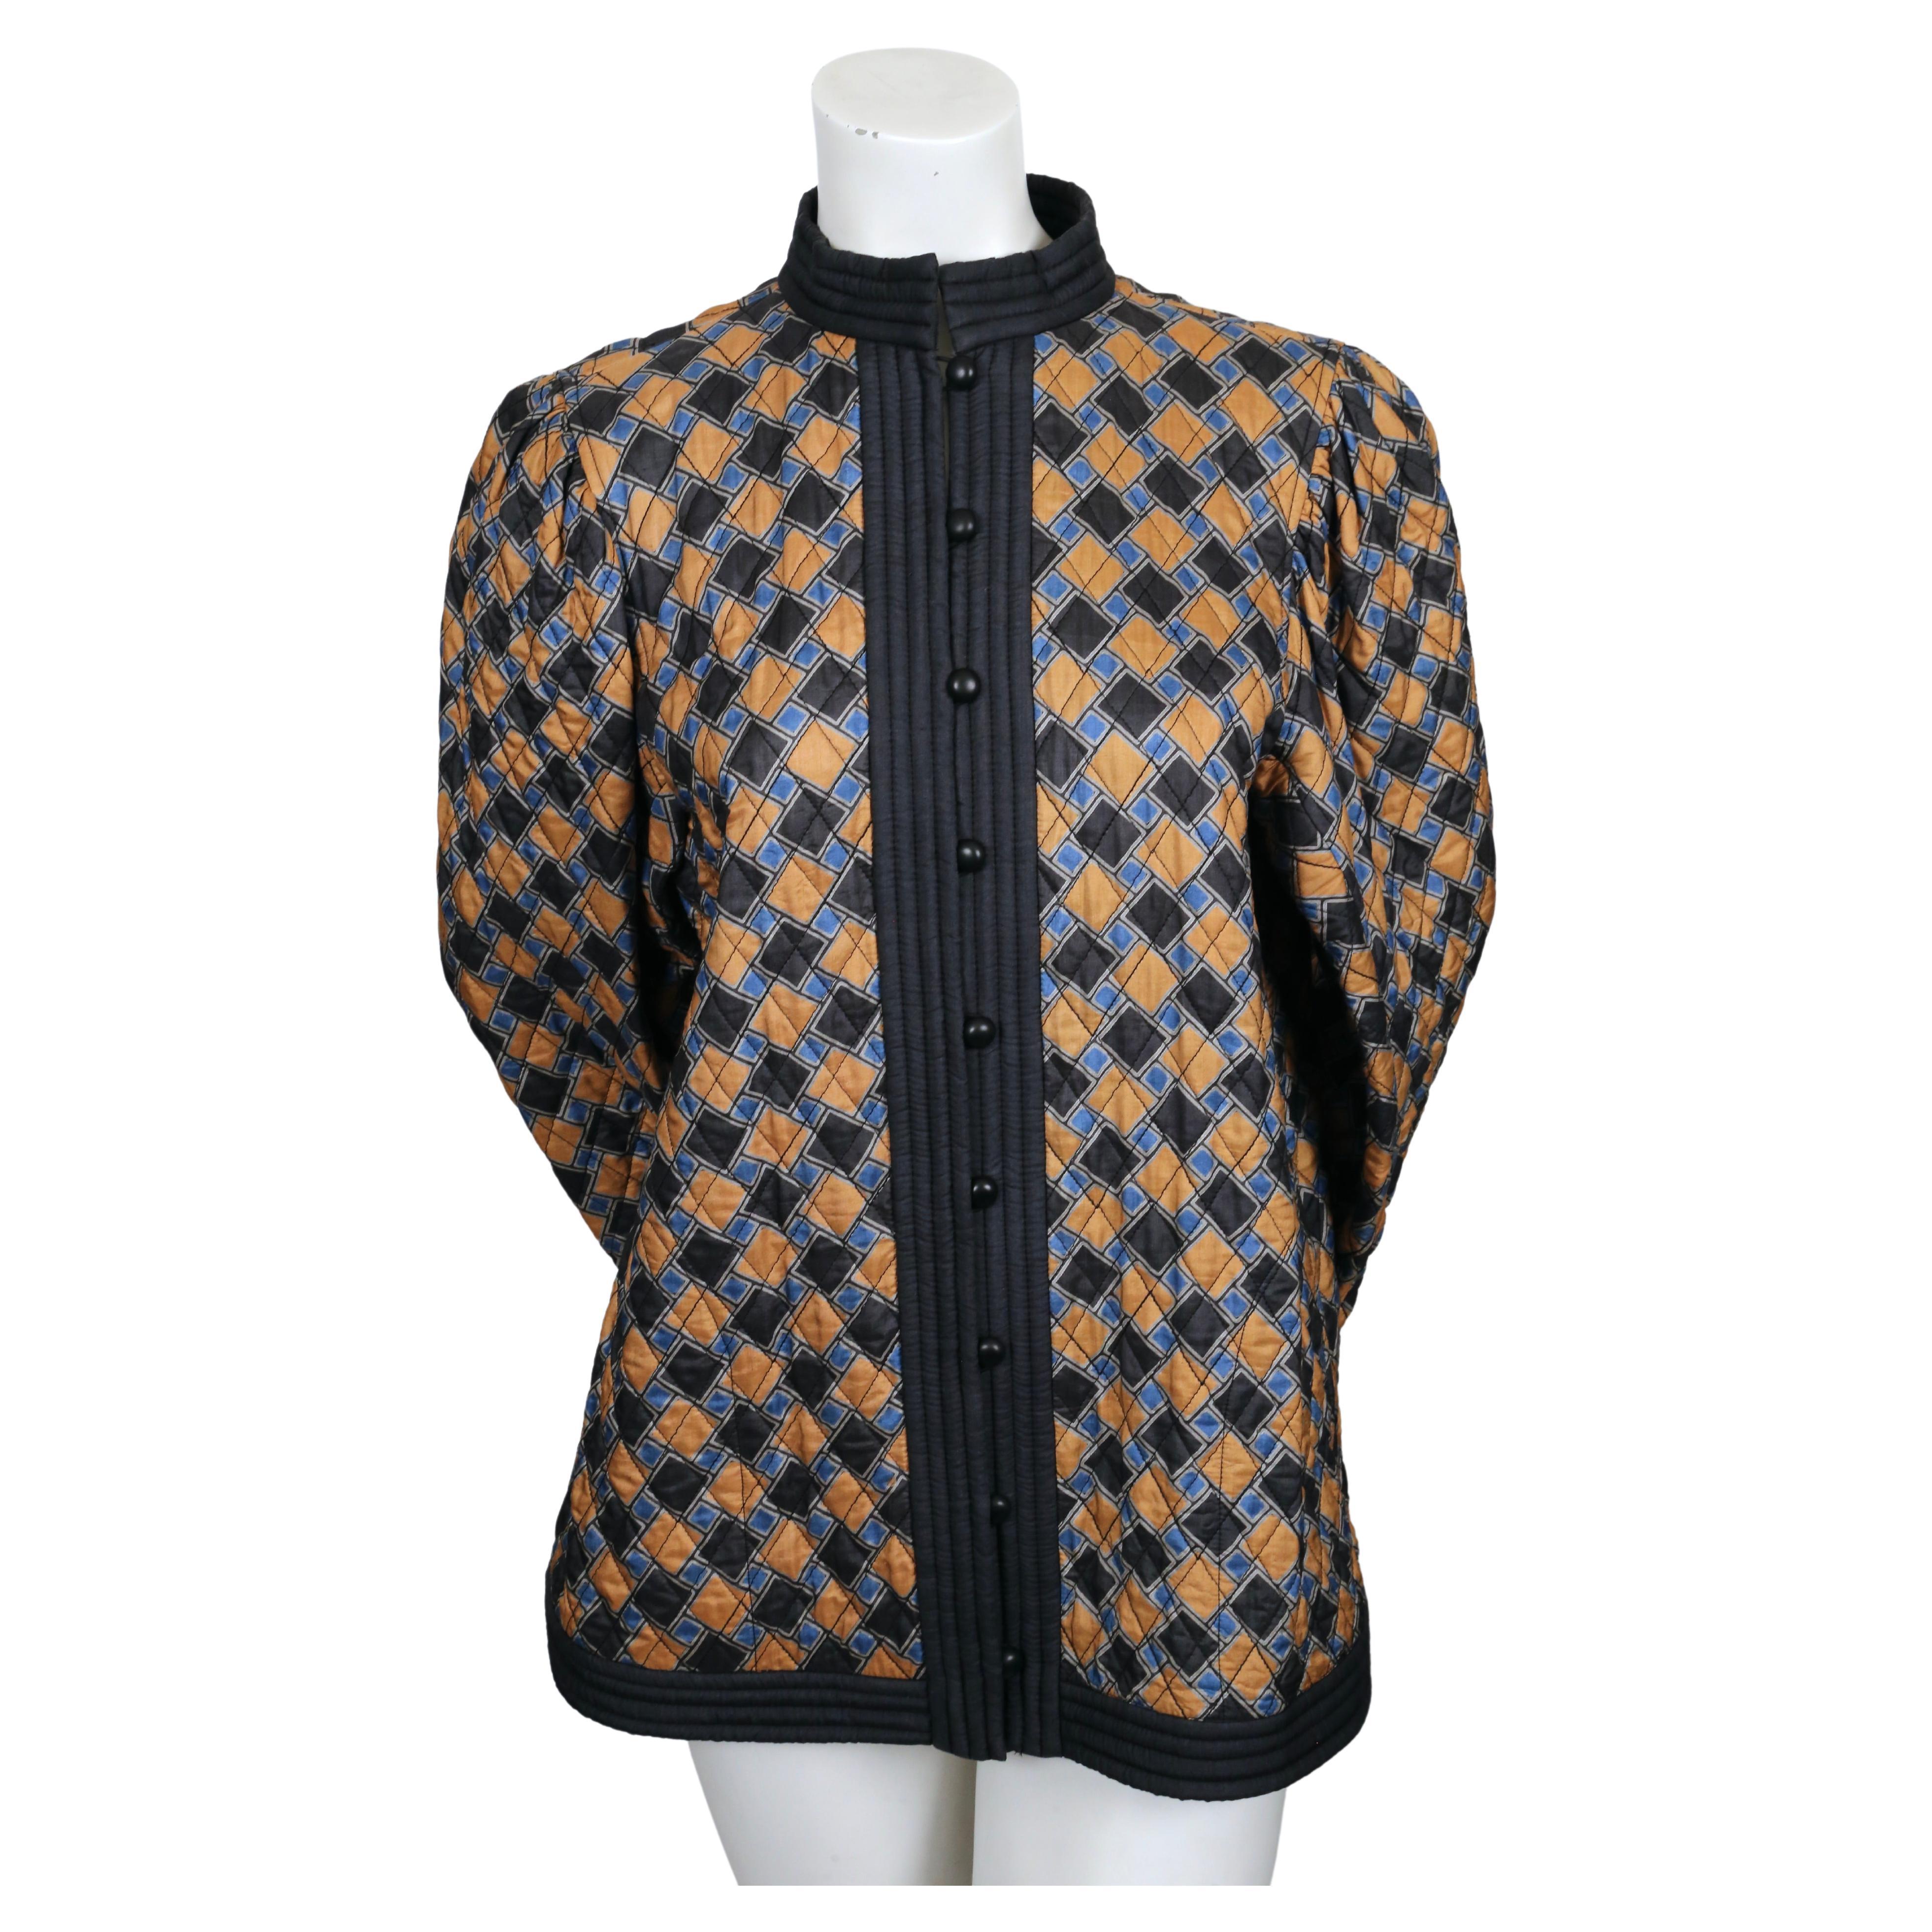 Very rare, abstract printed, silk quilted jacket designed by Yves Saint Laurent dating to 1979. Jacket is labeled a FR 36 but can also fit a French 38 (US 2-6) due to the large cut. Colors are blue and a muted orange with deep navy blue trim and